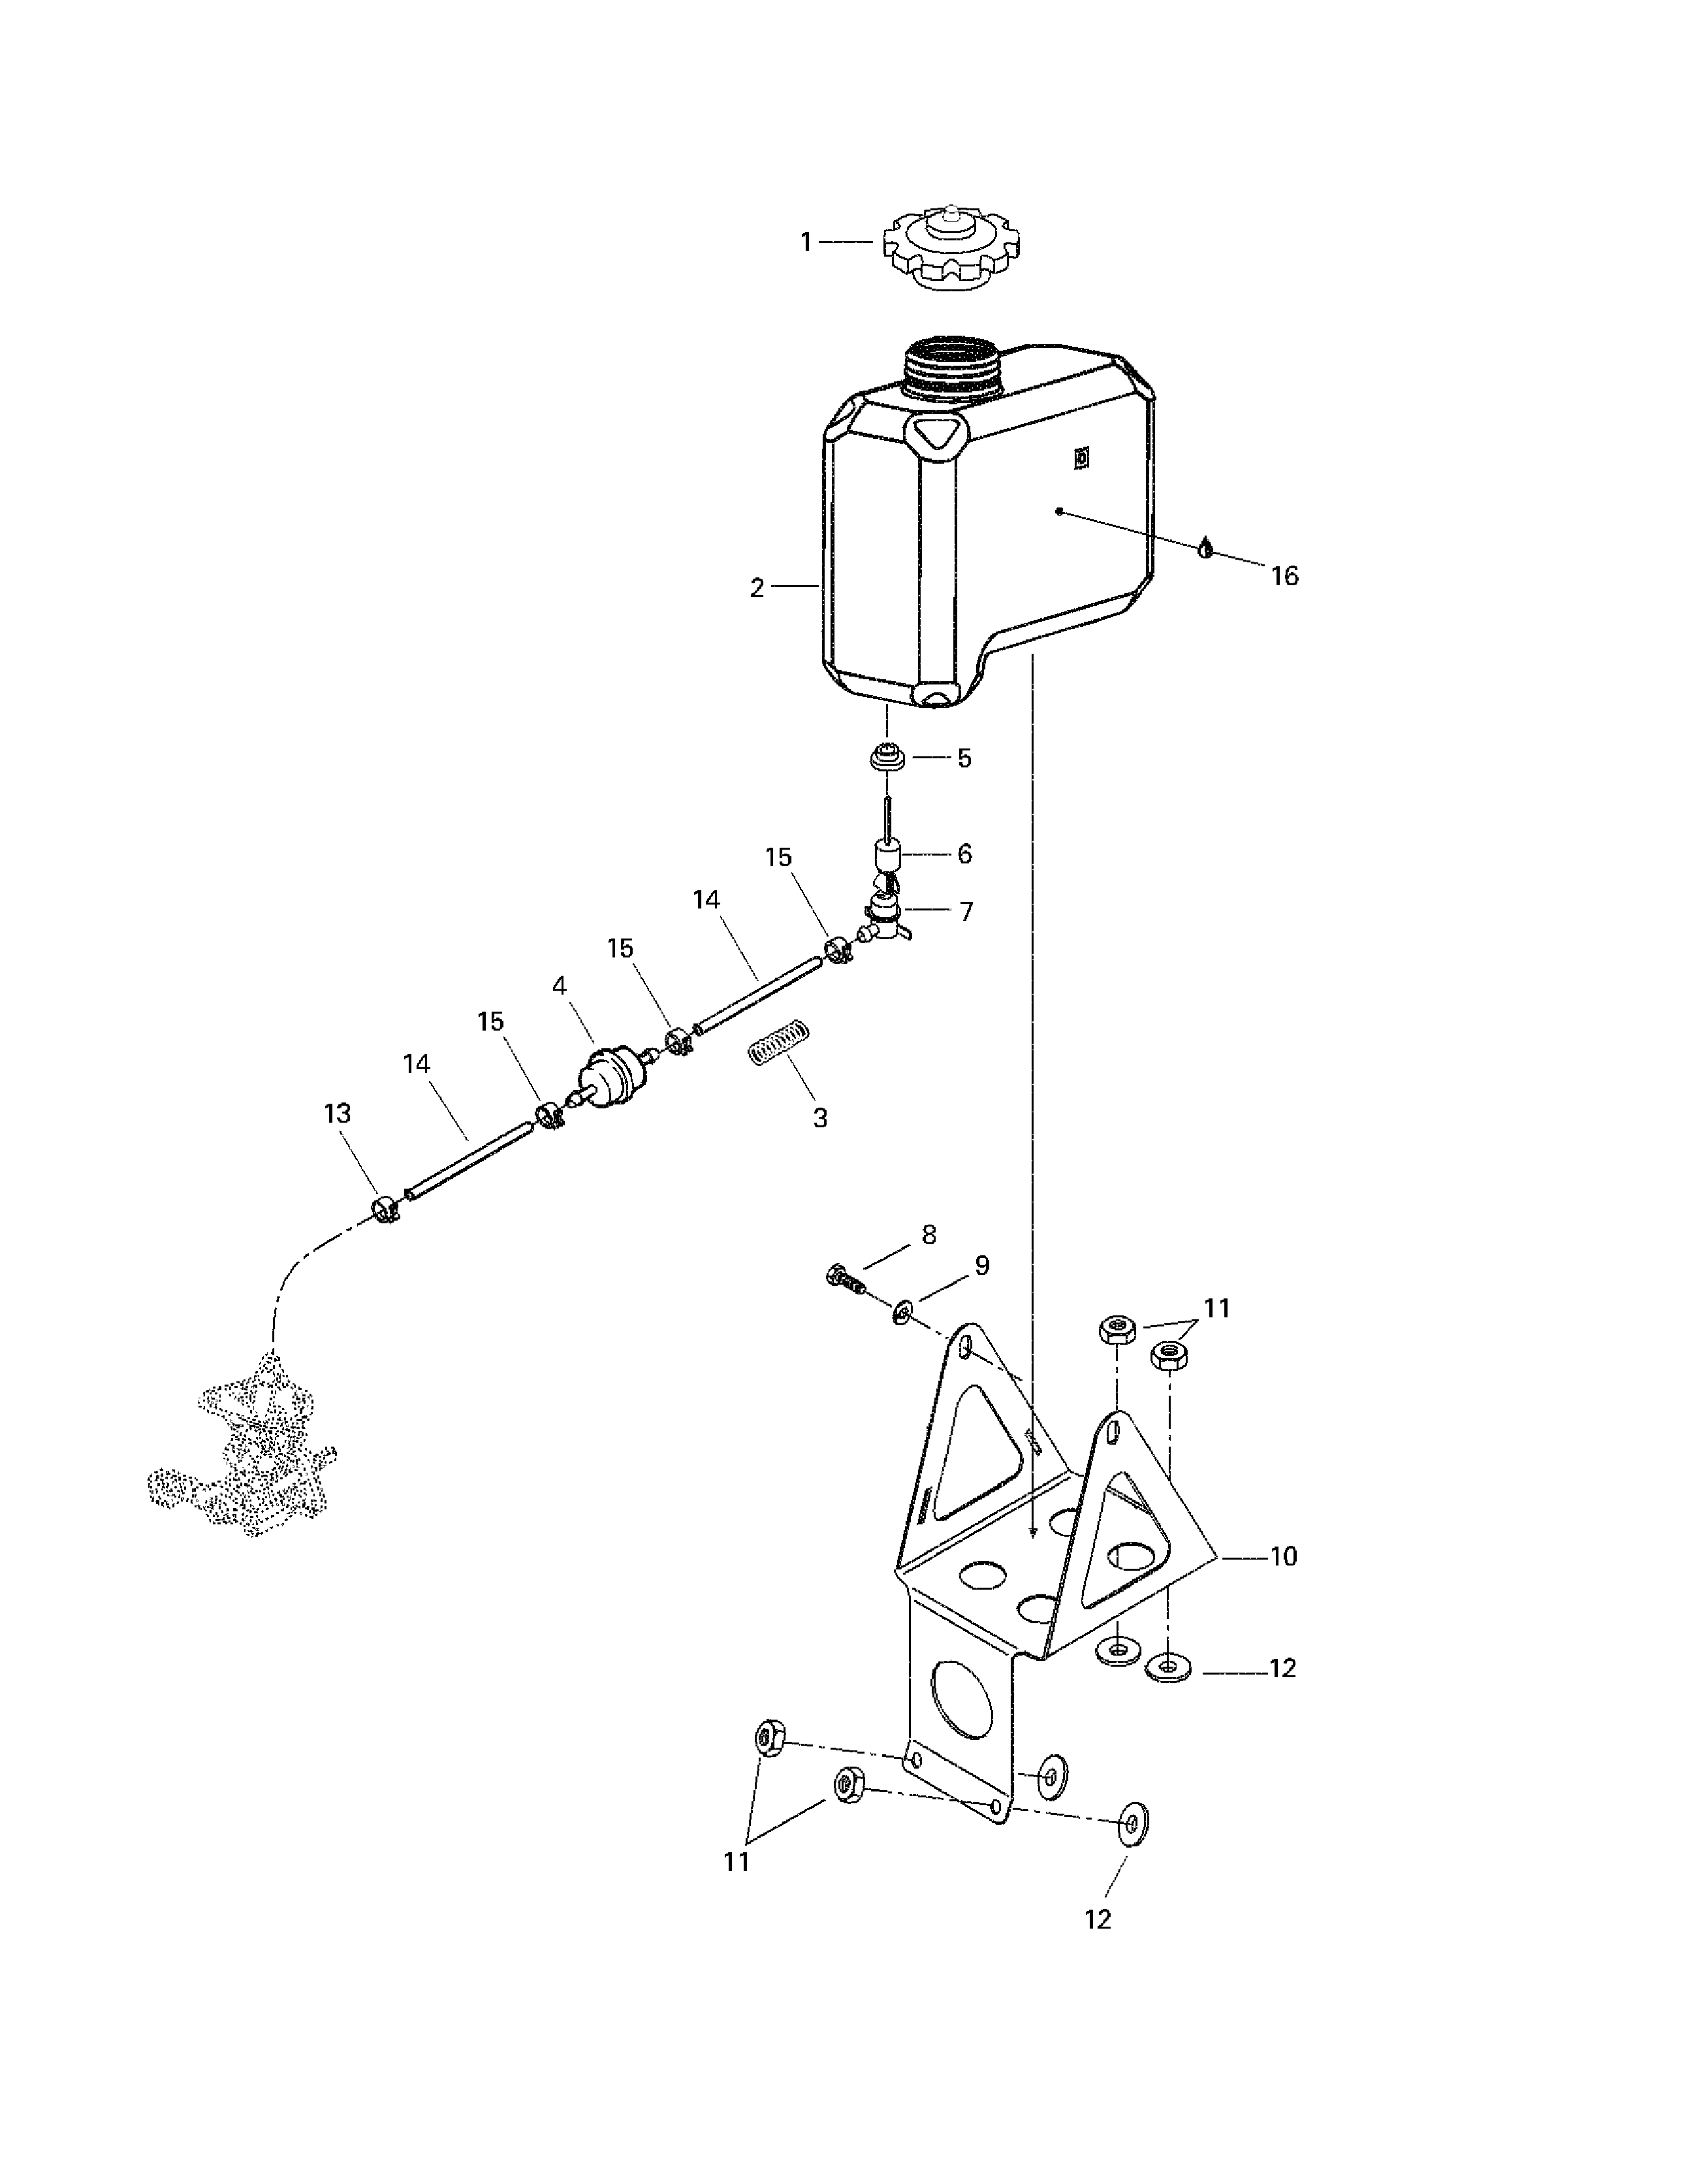 Oil tank and support